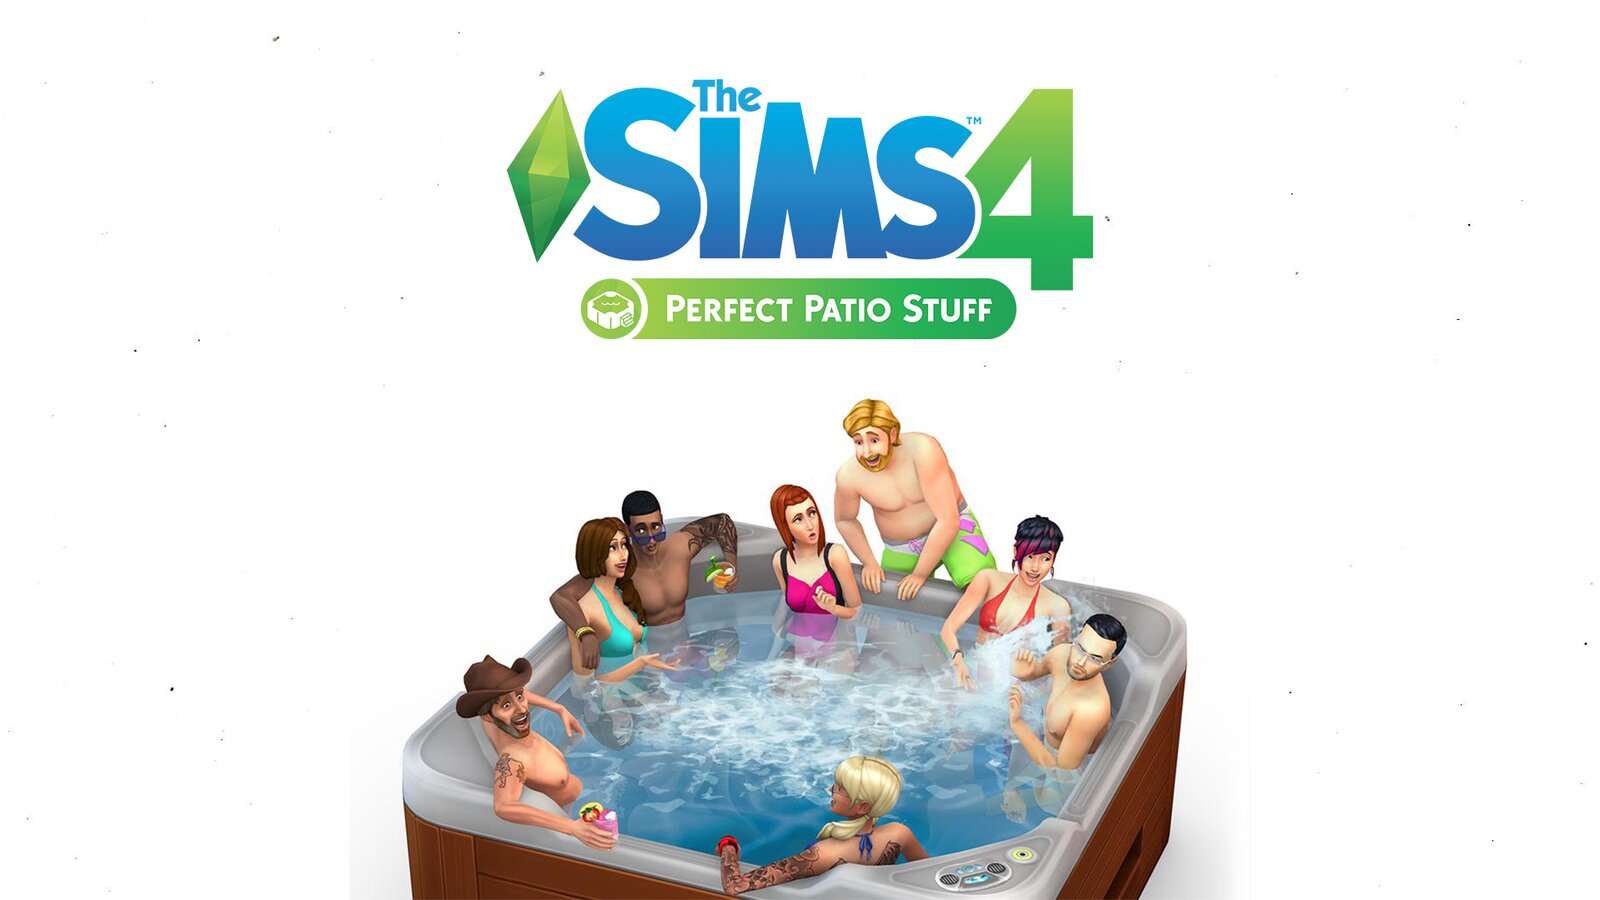 The Sims 4: Perfect Patio Stuff